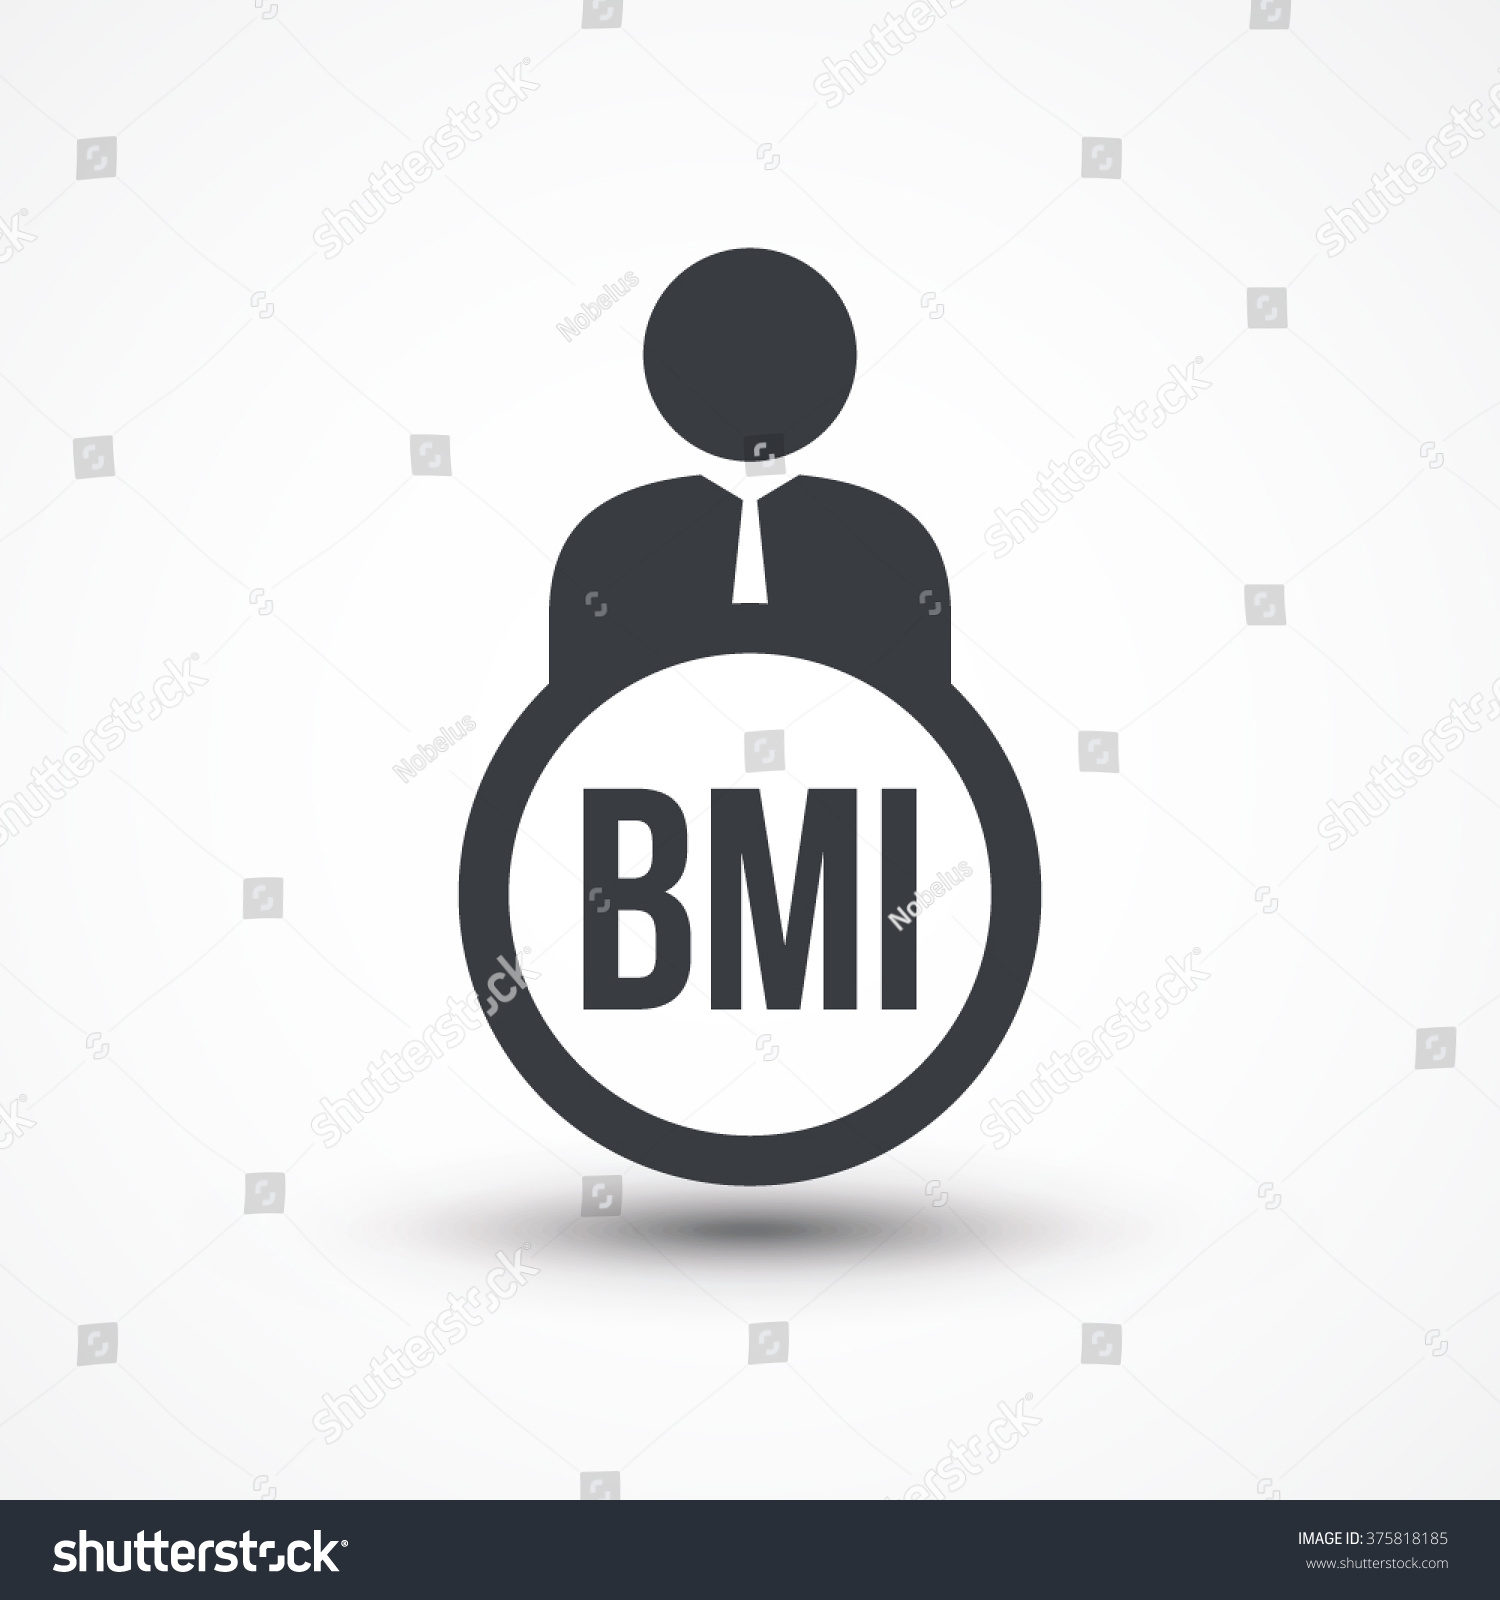 SVG of Human flat icon with word BMI Body Mass Index  svg